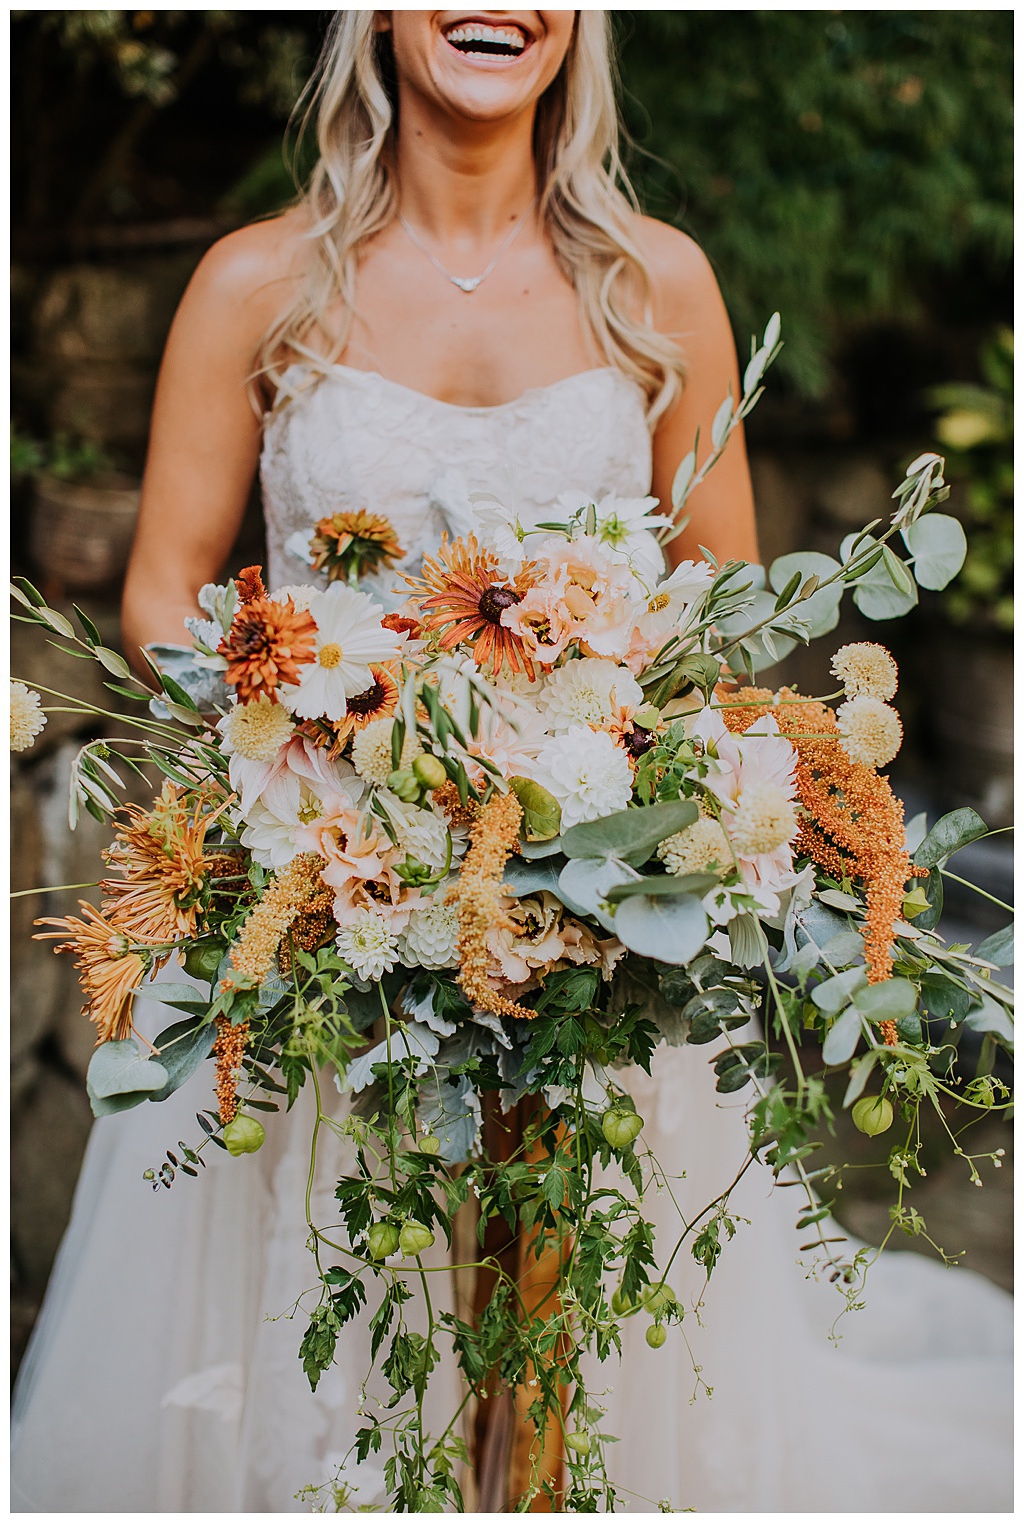 A view of the cascading wedding bouquet